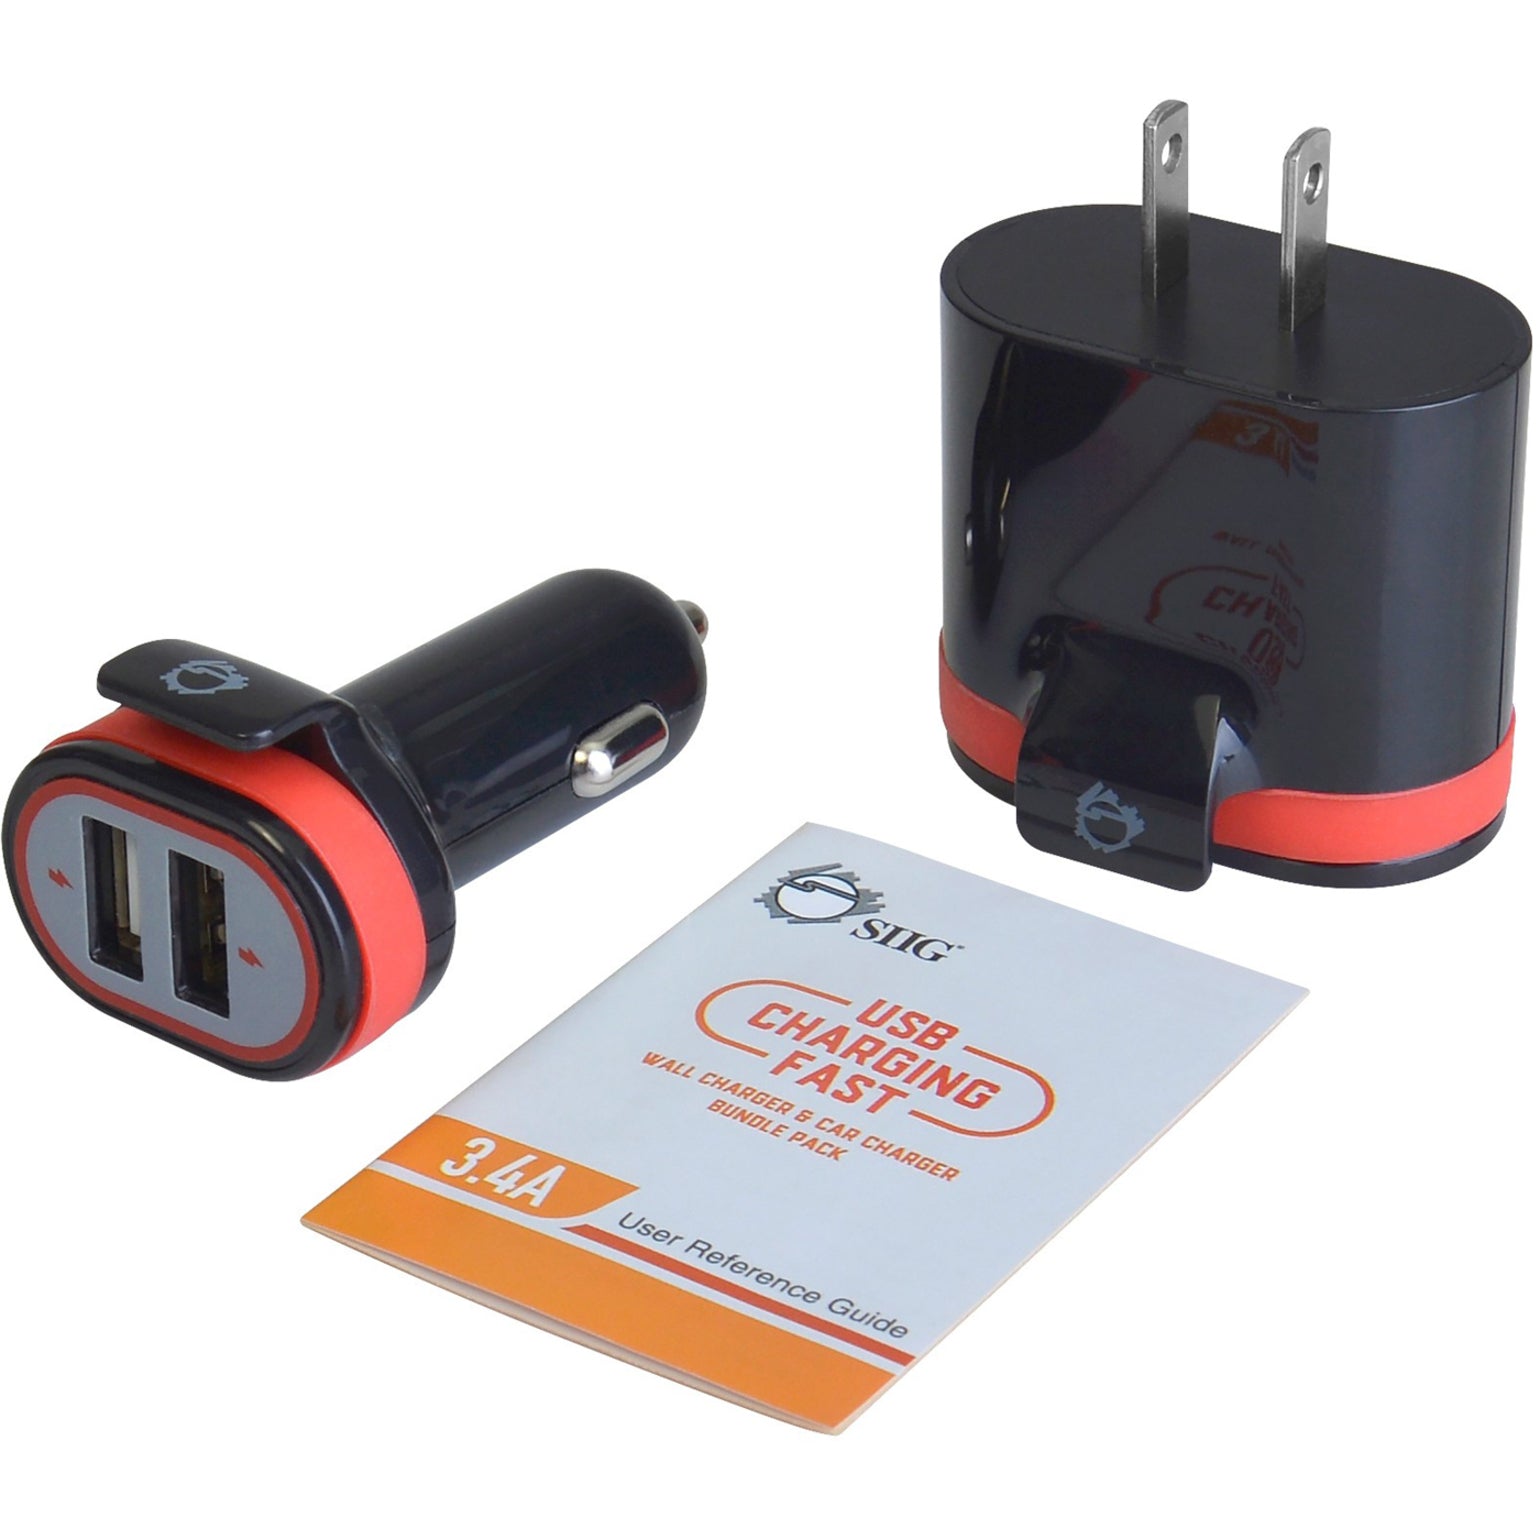 SIIG AC-PW1A12-S1 Fast Charging USB Wall Charger & Car Charger Bundle Pack - Black, 3.4A Output, 1 Year Warranty